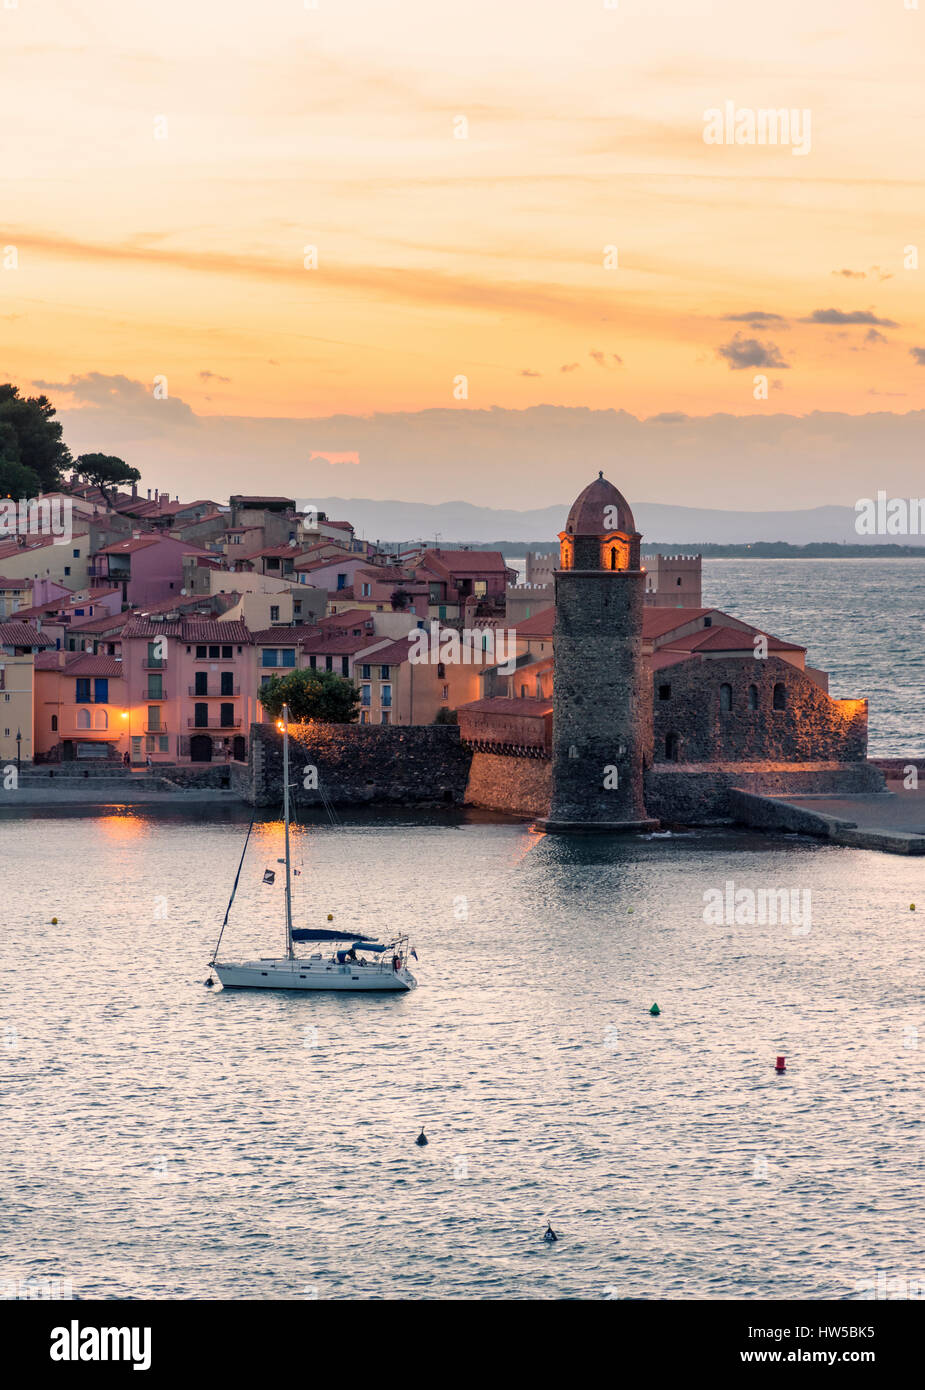 Sunset over the bell tower and Church of Notre Dame des Anges, Collioure, Côte Vermeille, France Stock Photo